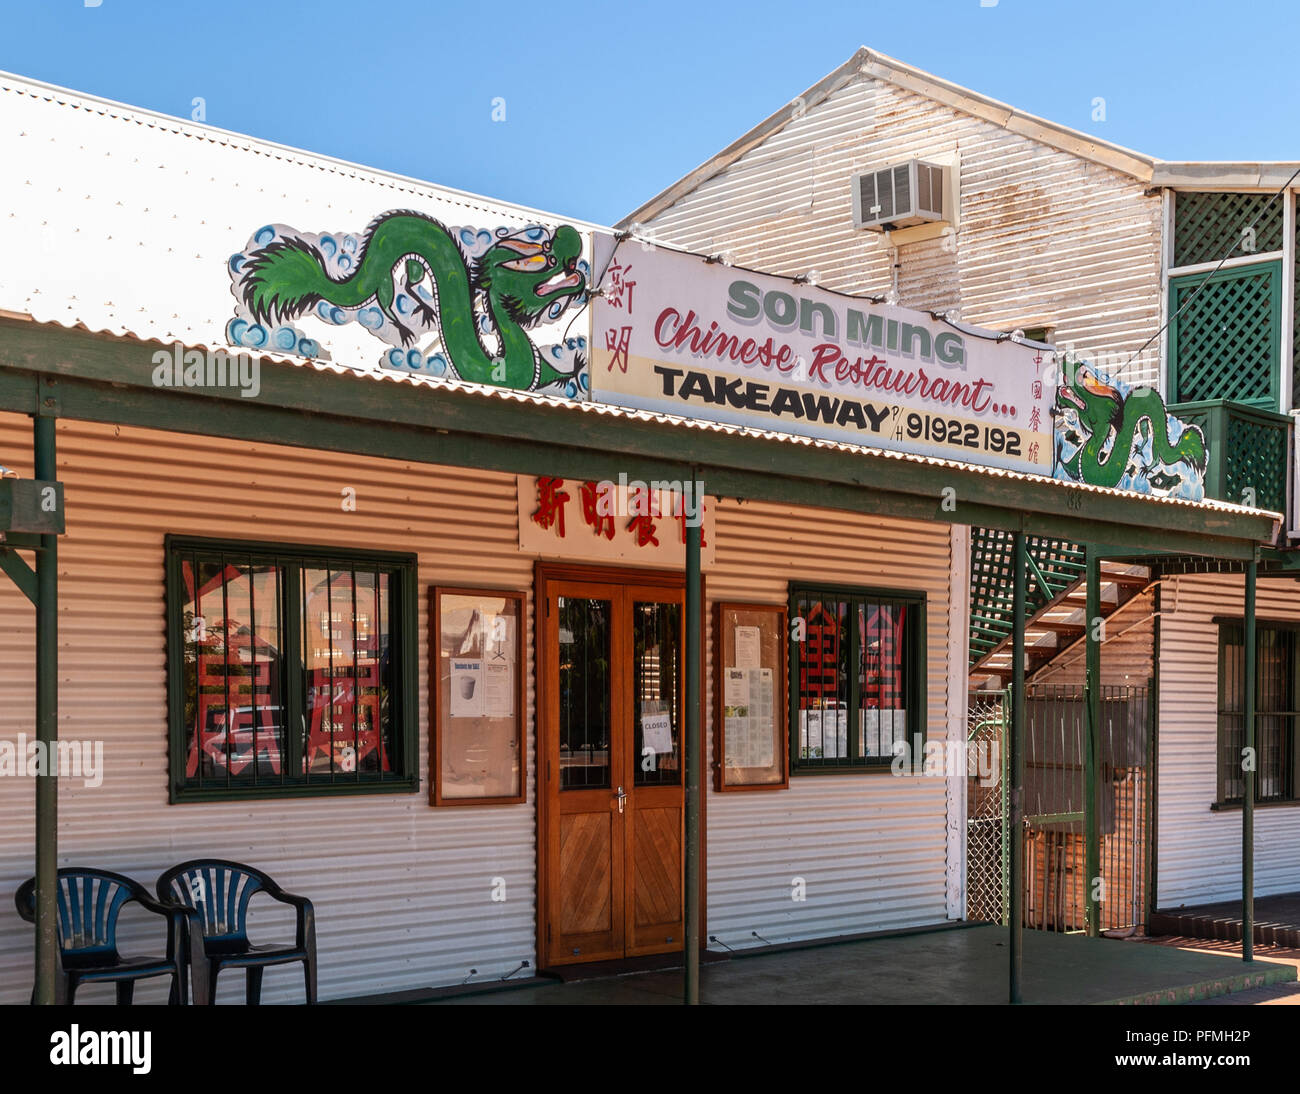 Broome, WA, Australia - November 29, 2009: Son Ming Chinese Restaurant in row of businesses, is painted mostly white and green. Mandarin characters in Stock Photo